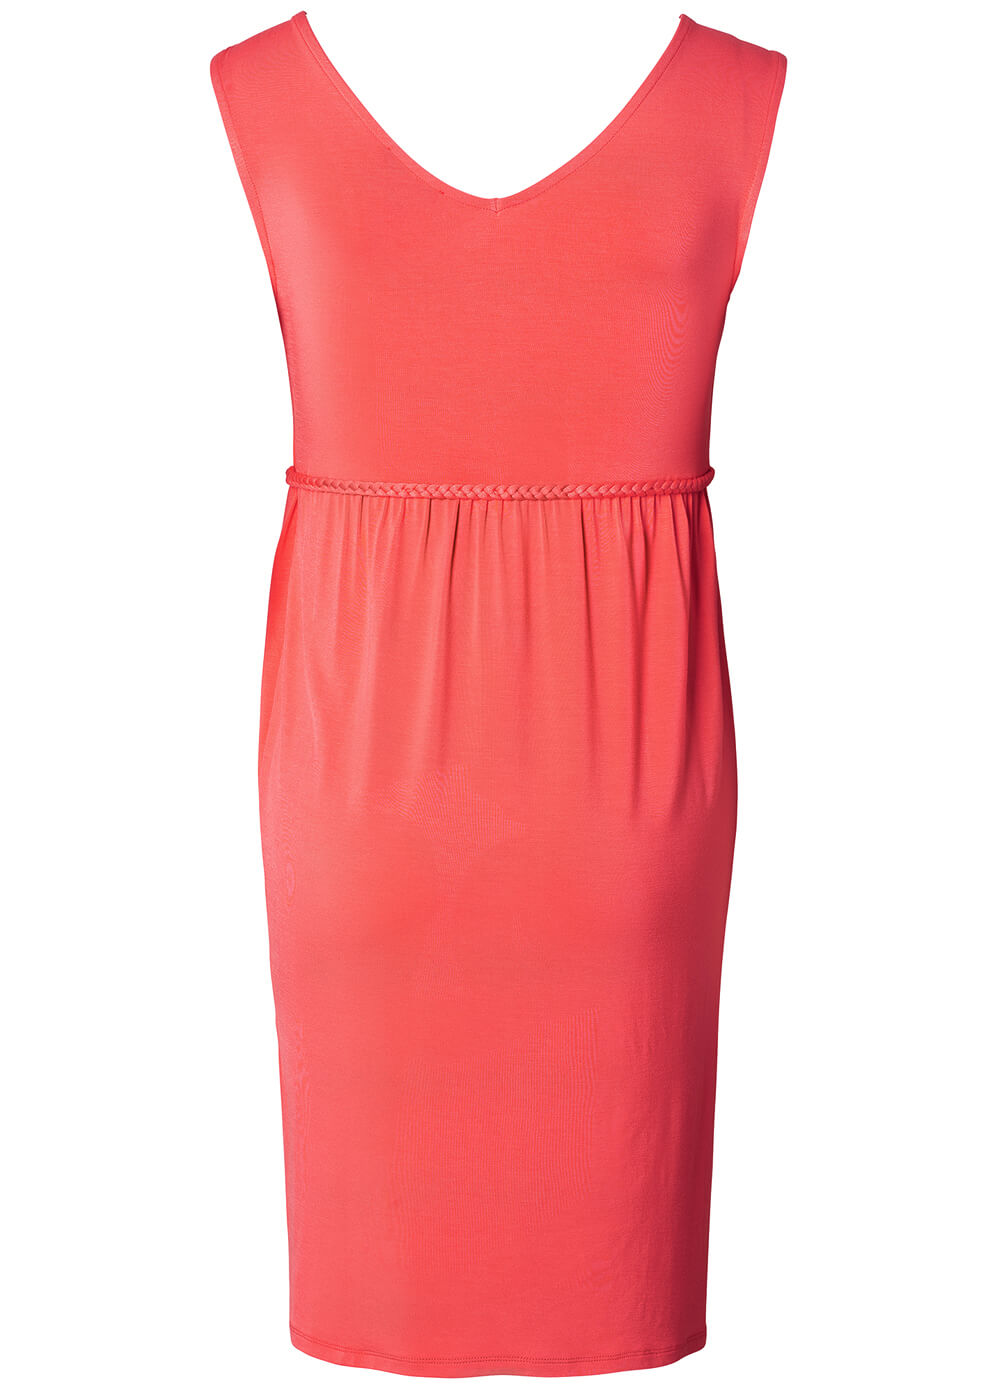 Double V-Neck Maternity Nursing Dress in Coral by Esprit